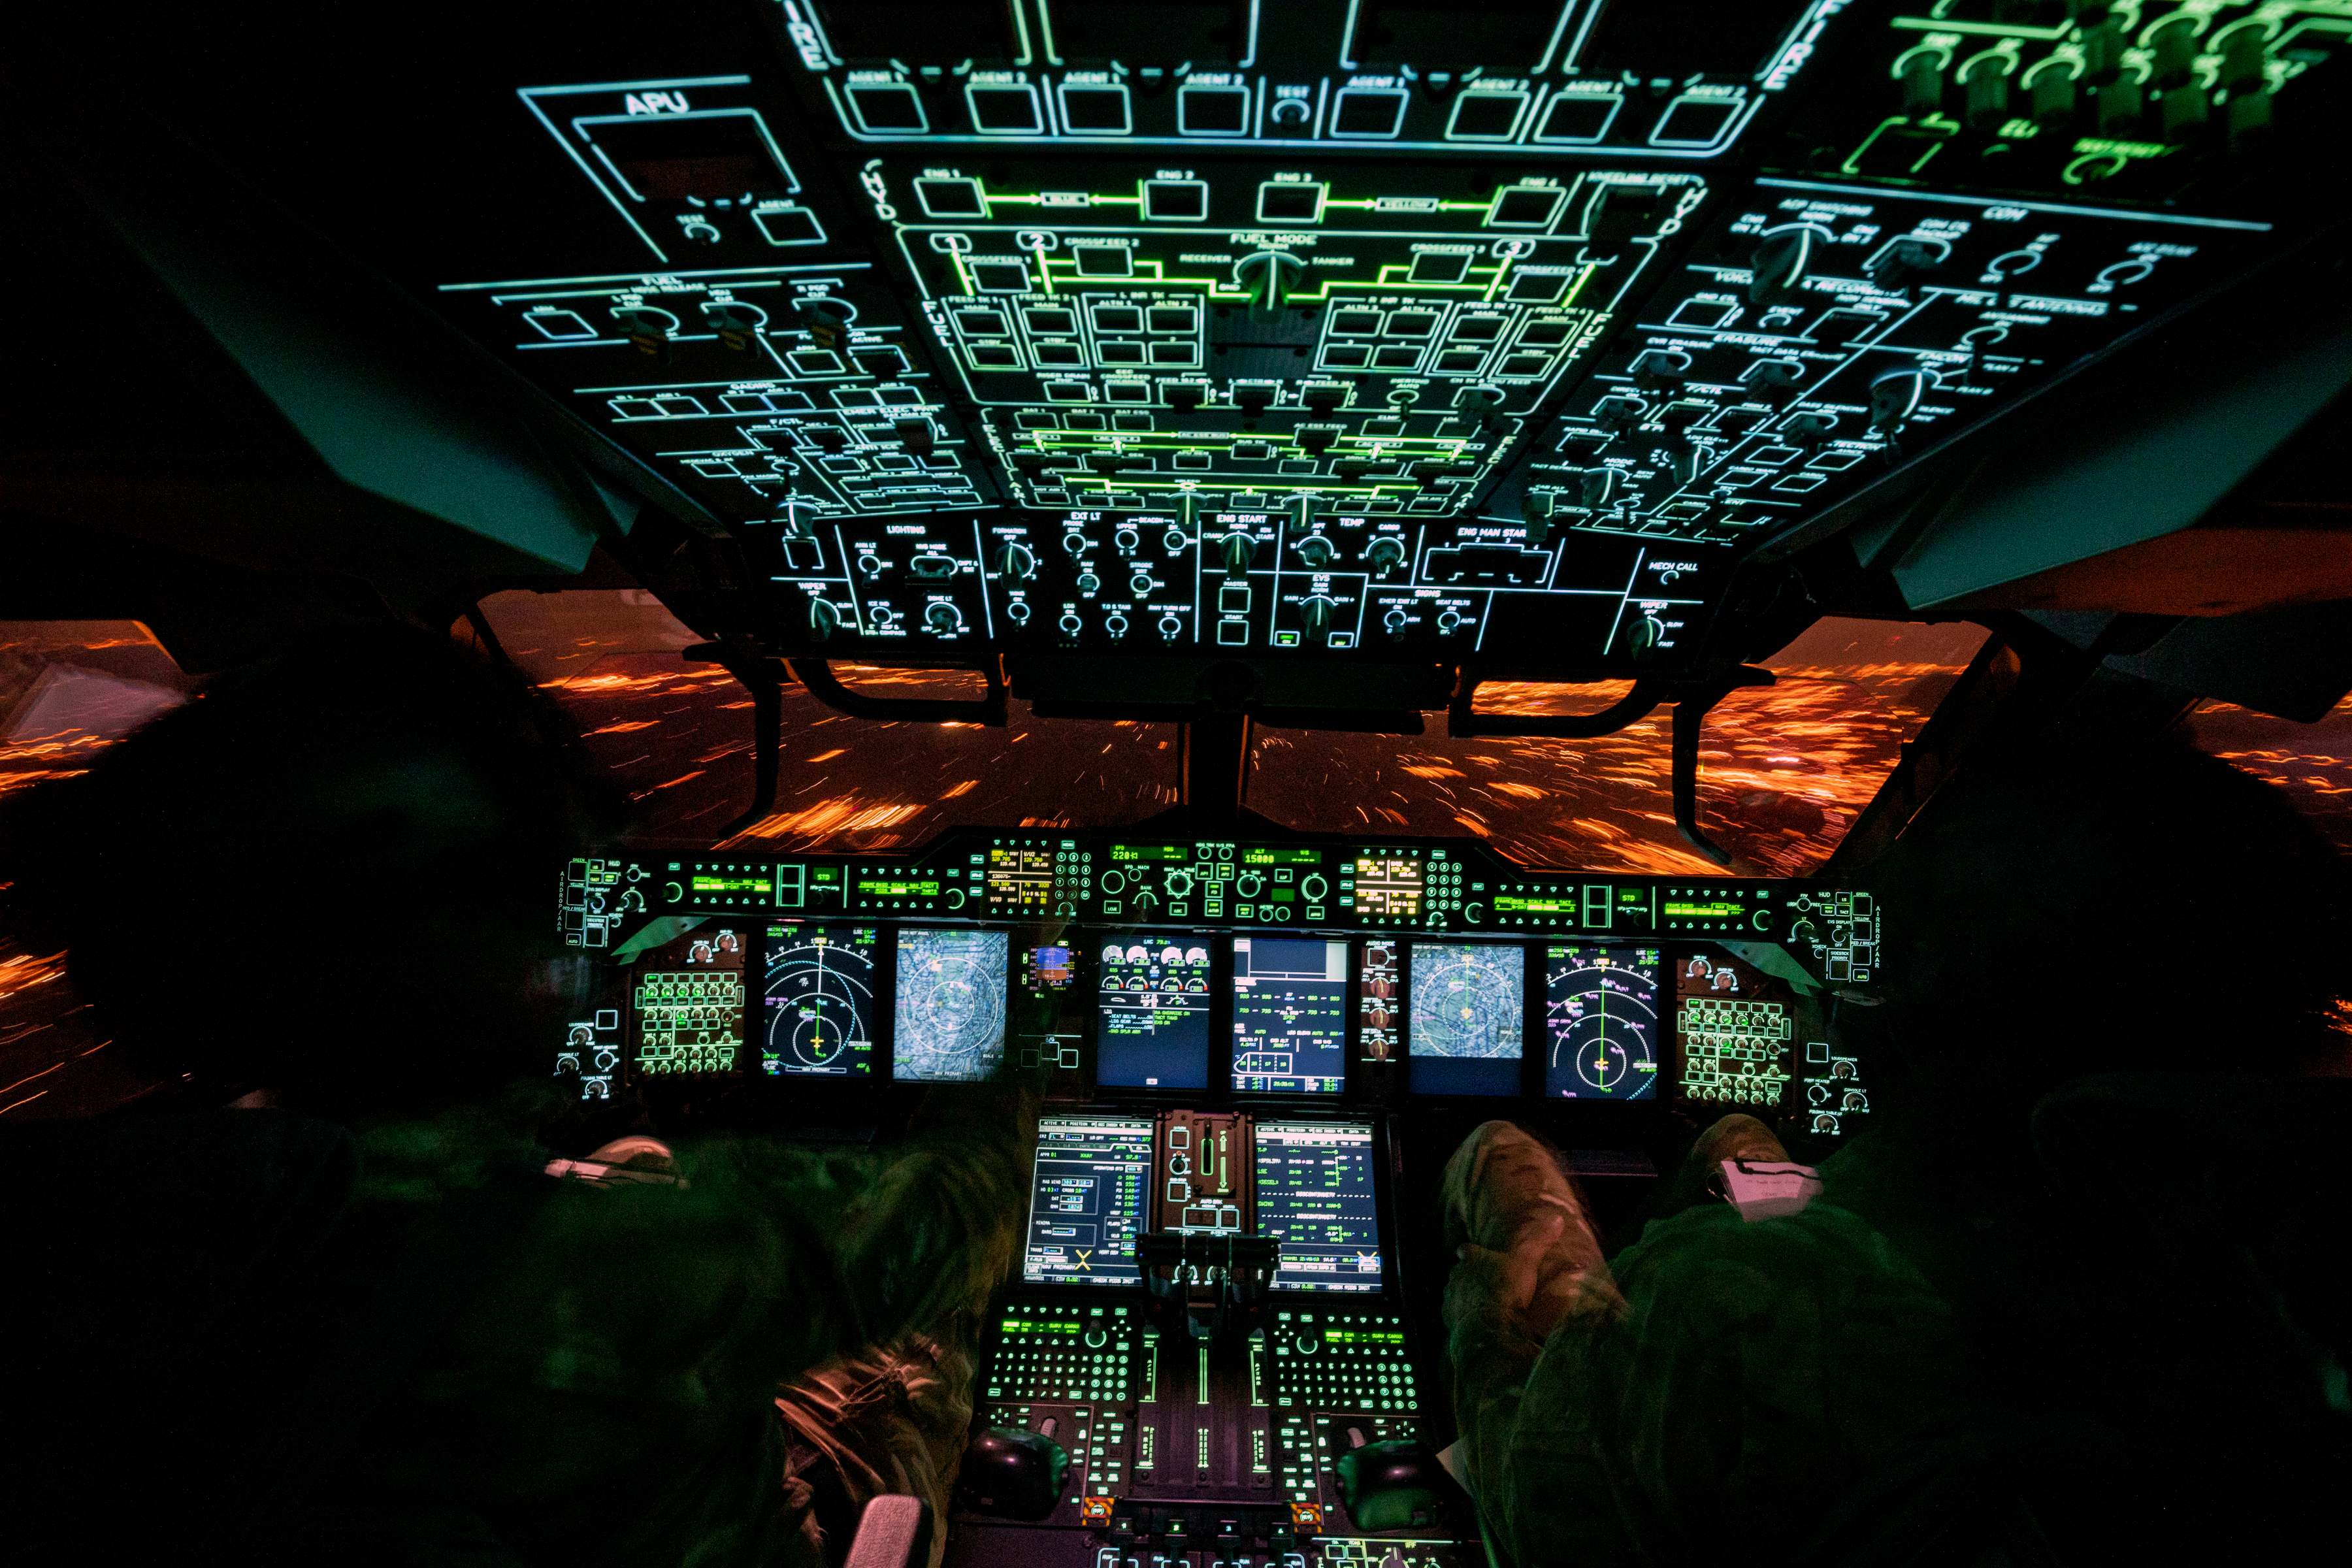 Cockpit of RAF plane at night, all the instruments lit up and displaying information 